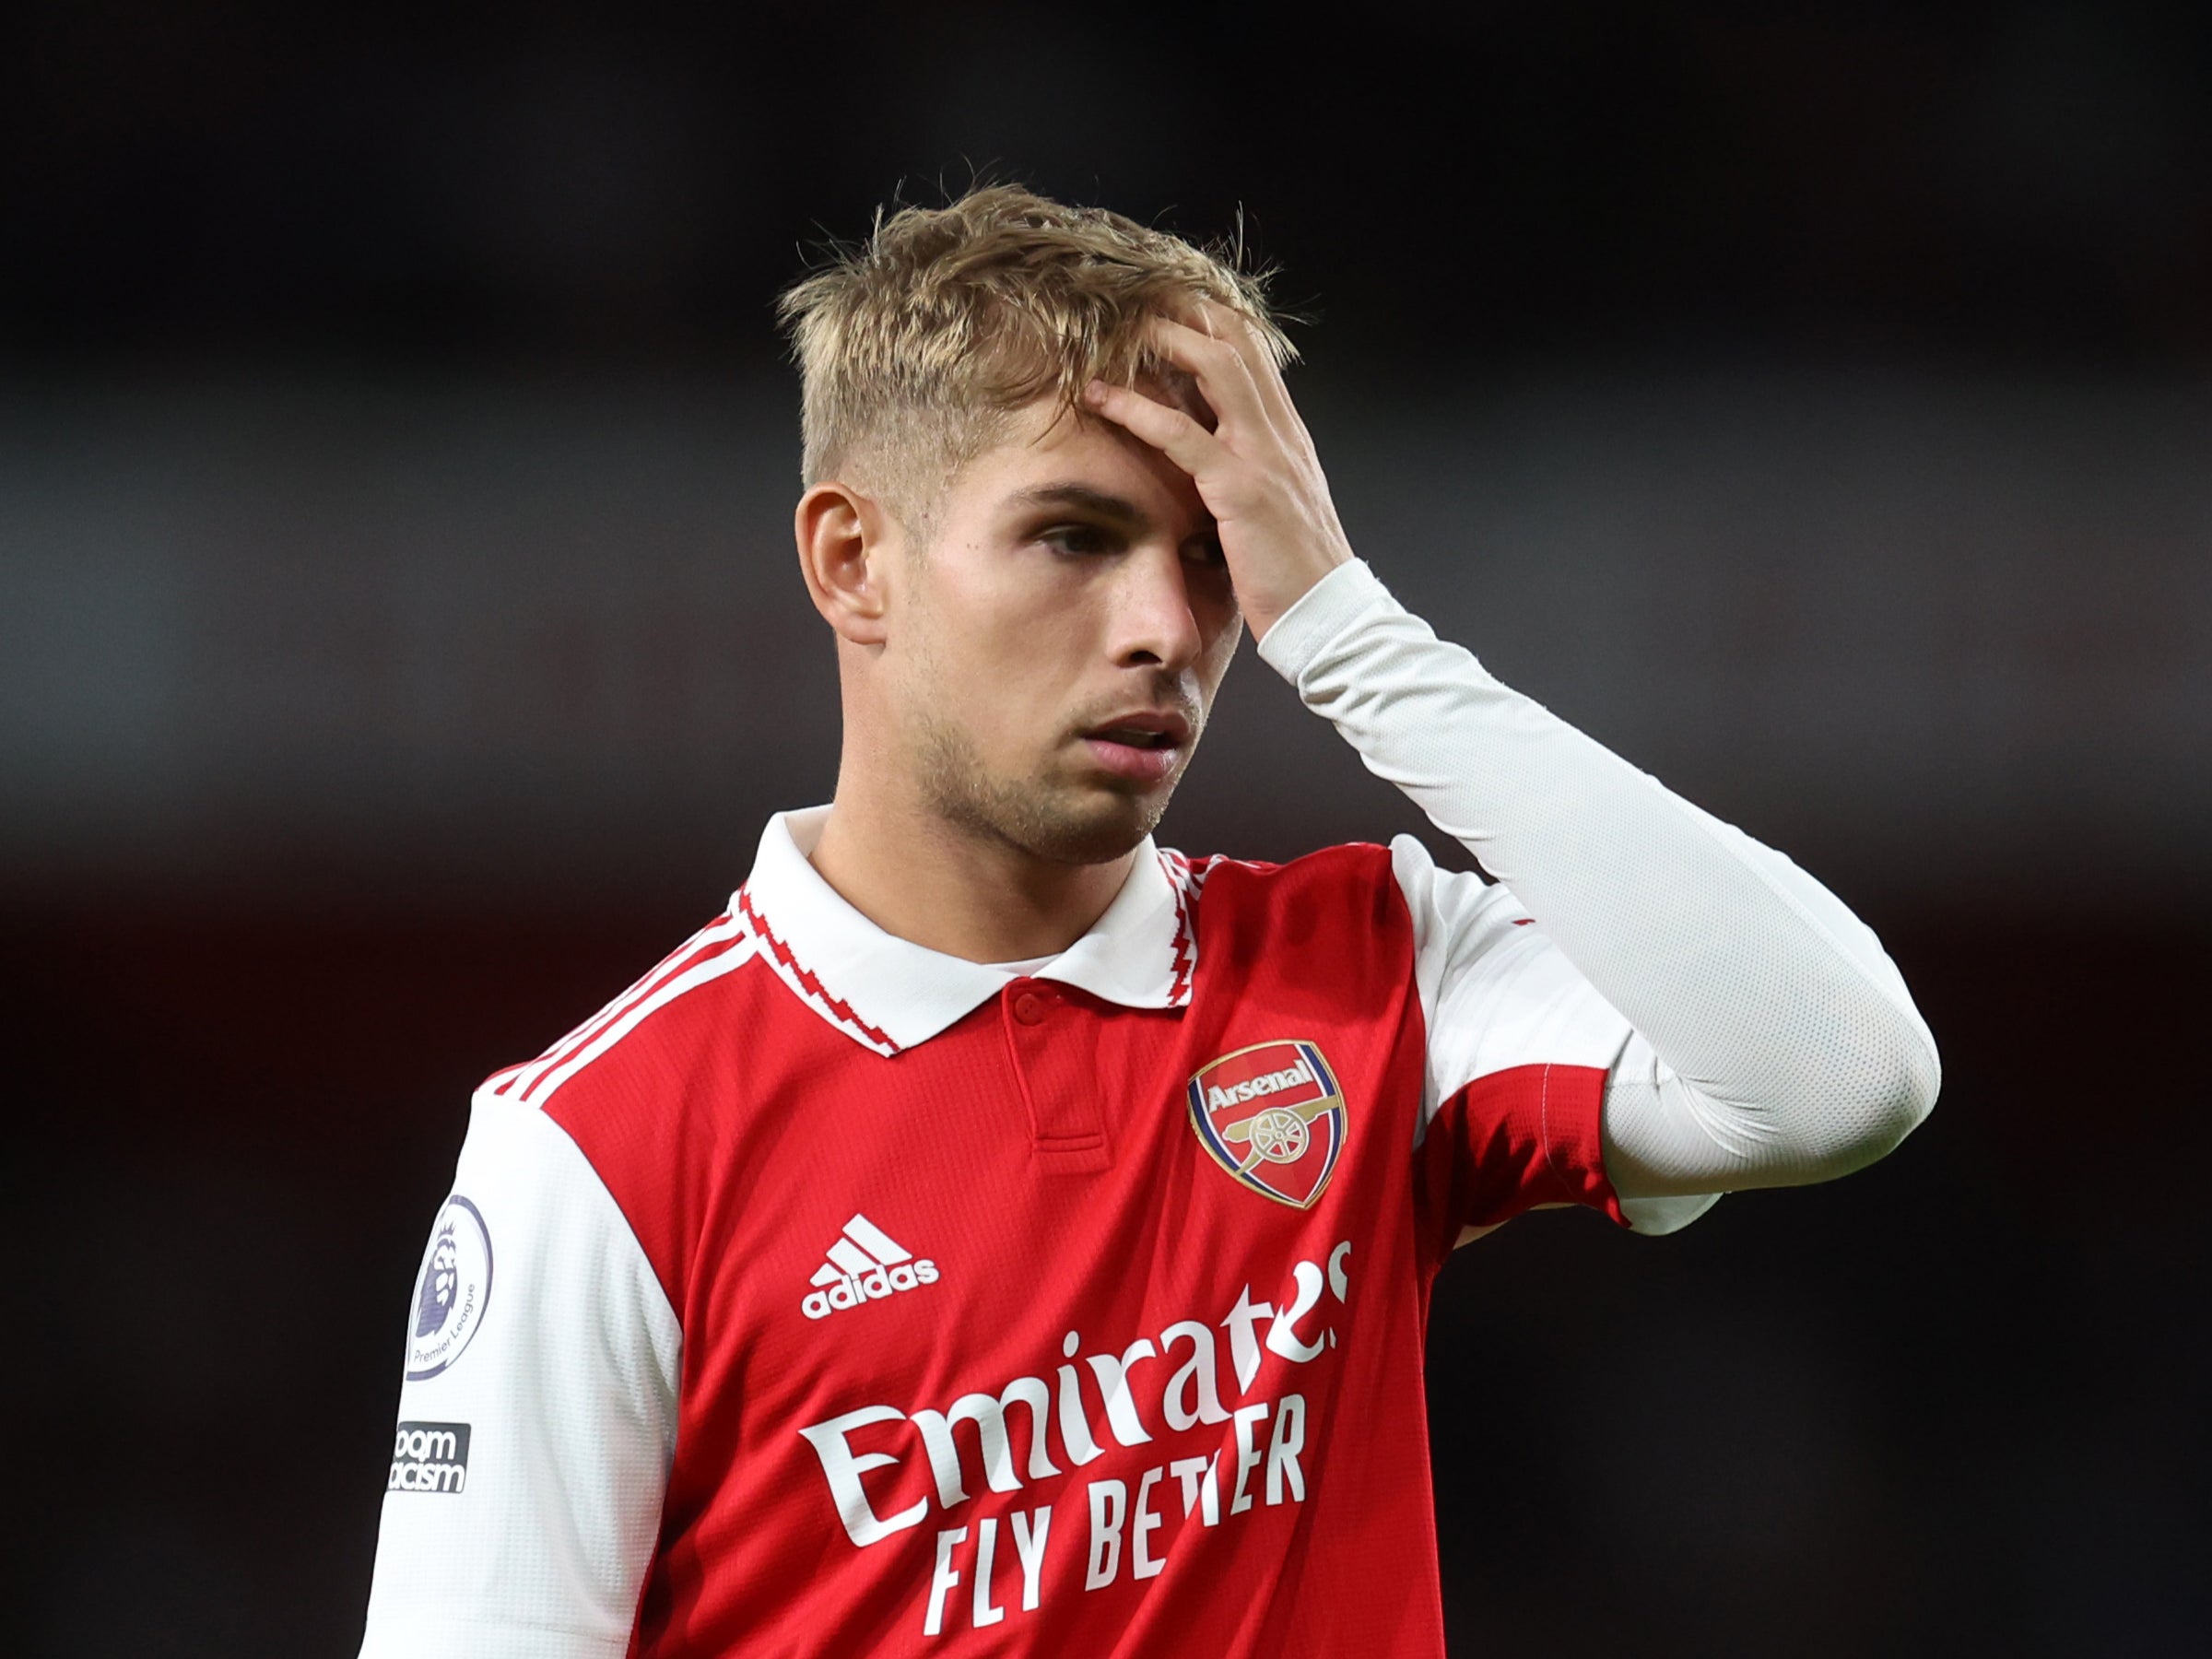 Arsenal midfielder Emile Smith Rowe out for two months after groin surgery